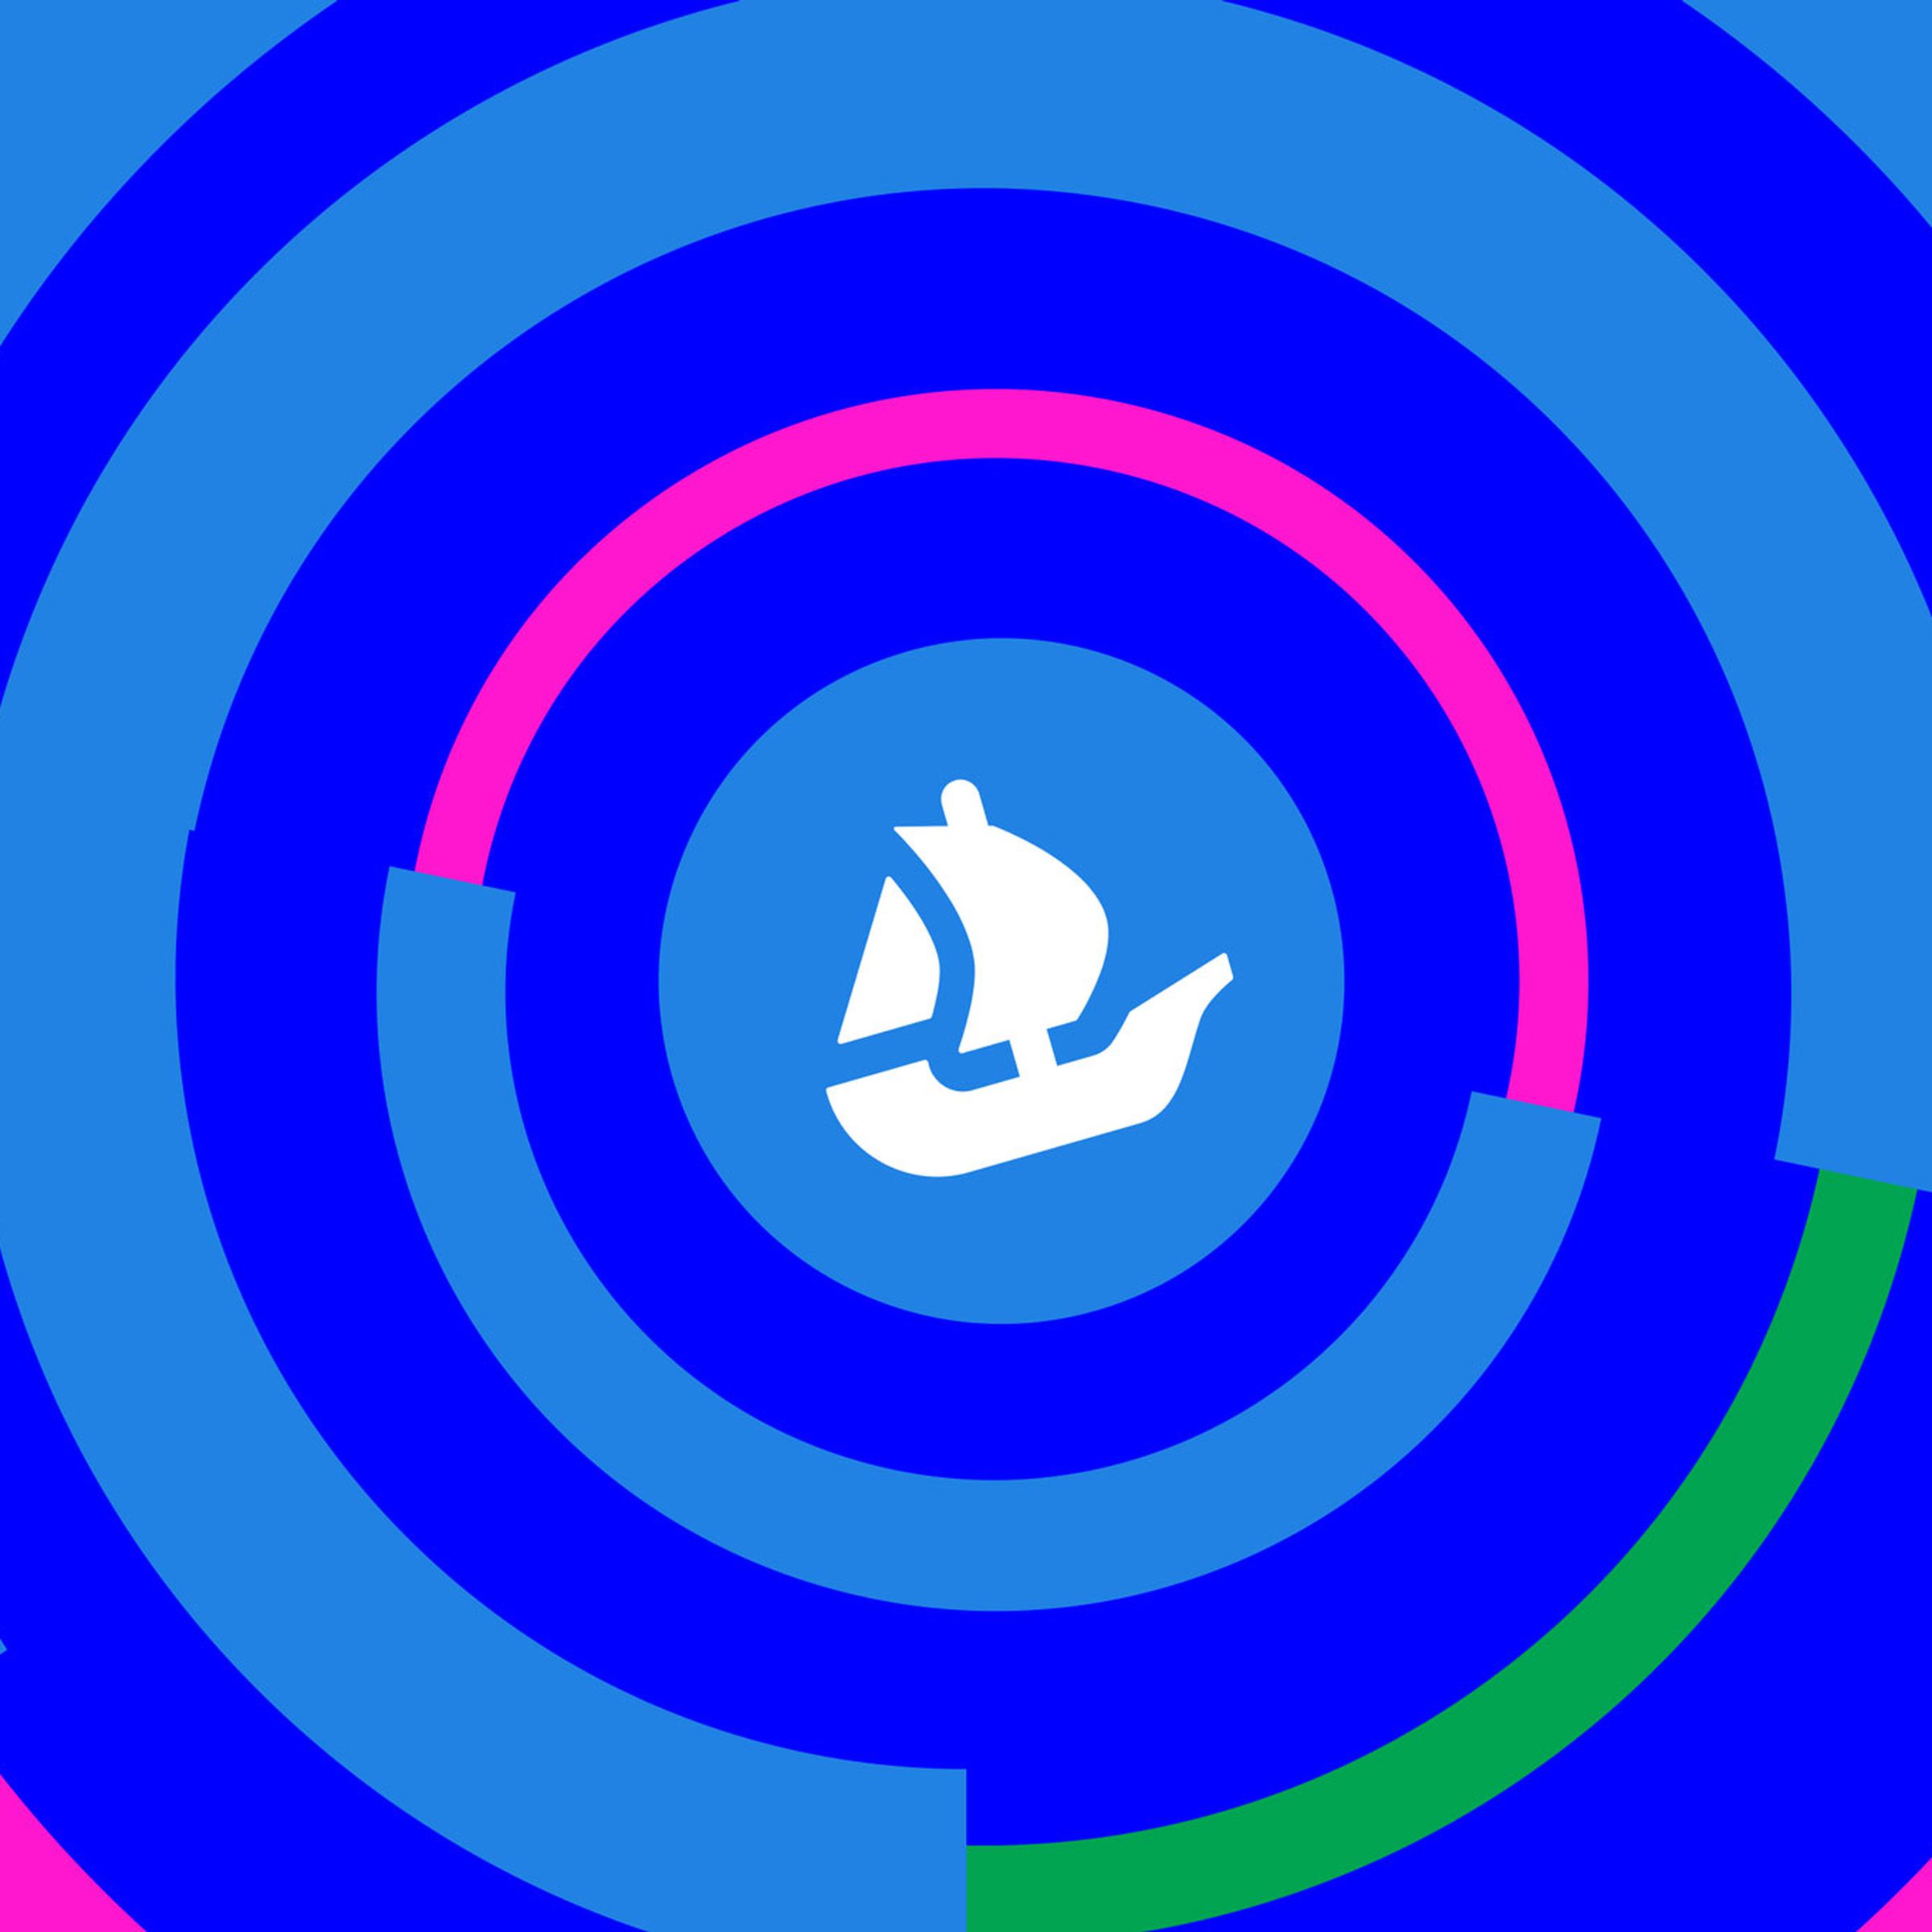 Illustration of the OpenSea logo on a blue background, with several blue, green, and pink circles around it.